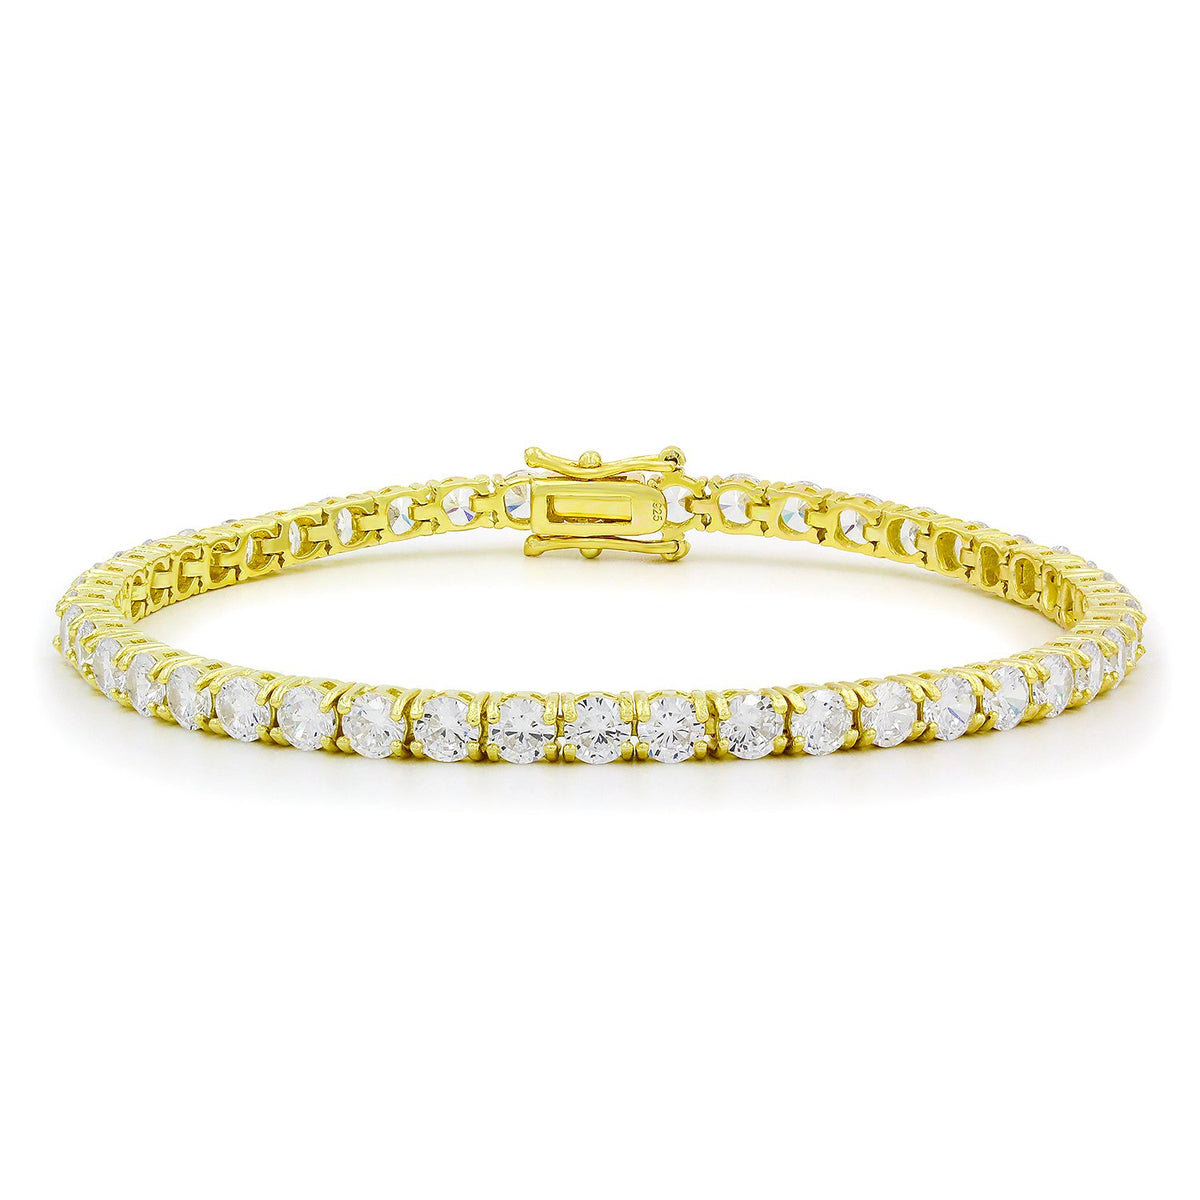 925 Sterling Silver 4mm Round Cut Tennis Bracelet/Anklet, Yellow Gold Plated